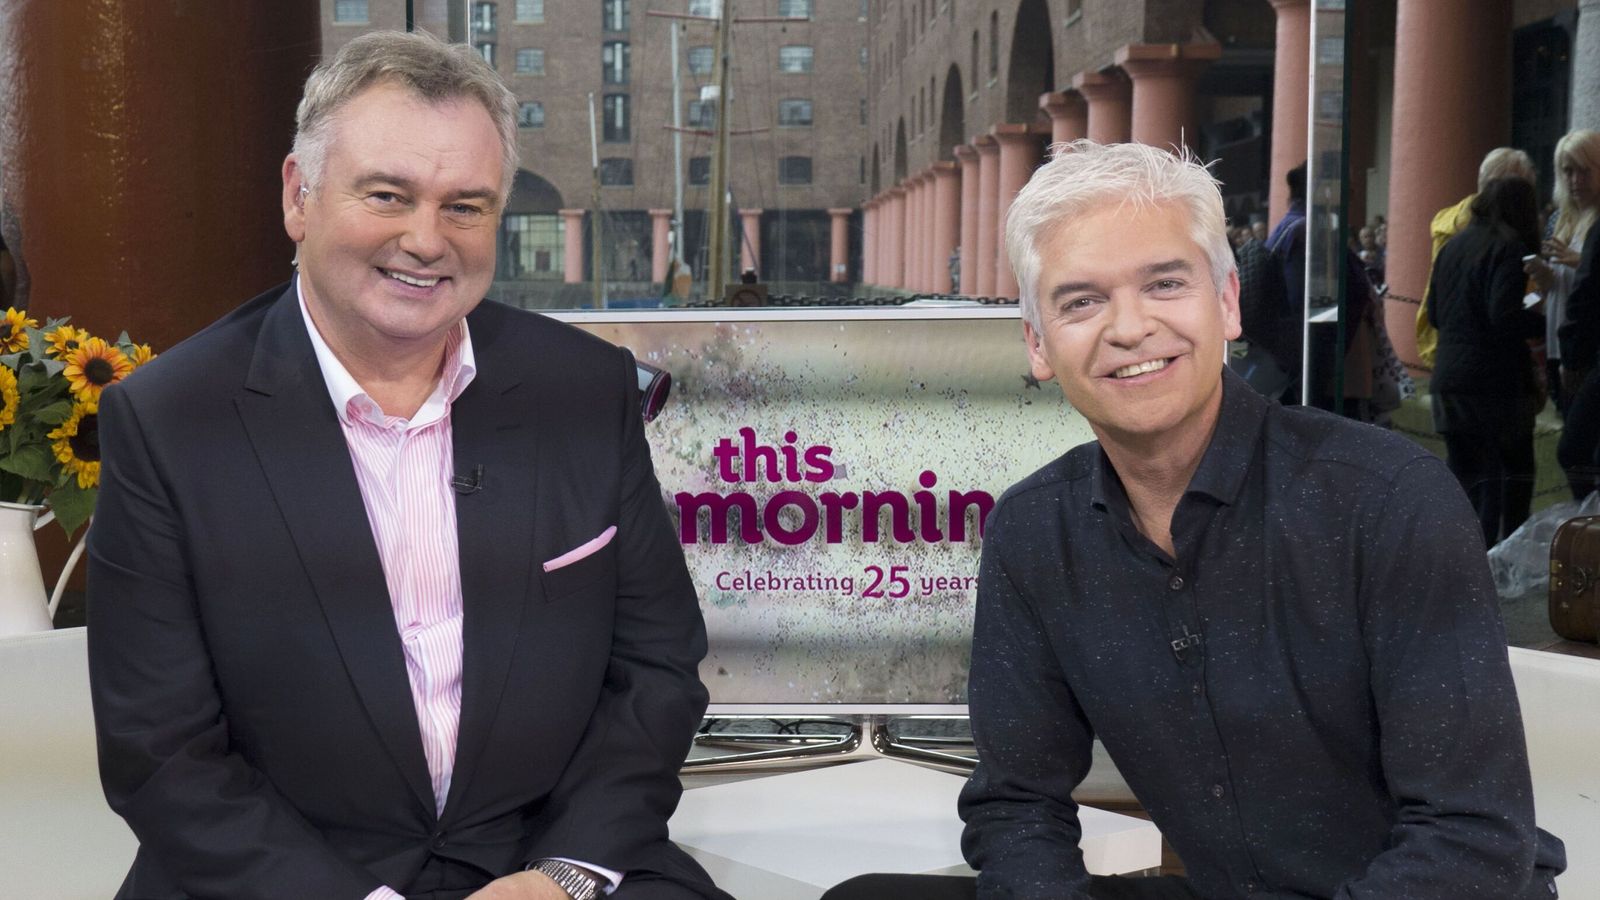 Eamonn Holmes trades blows on social media with 'delusional liar' Phillip Schofield